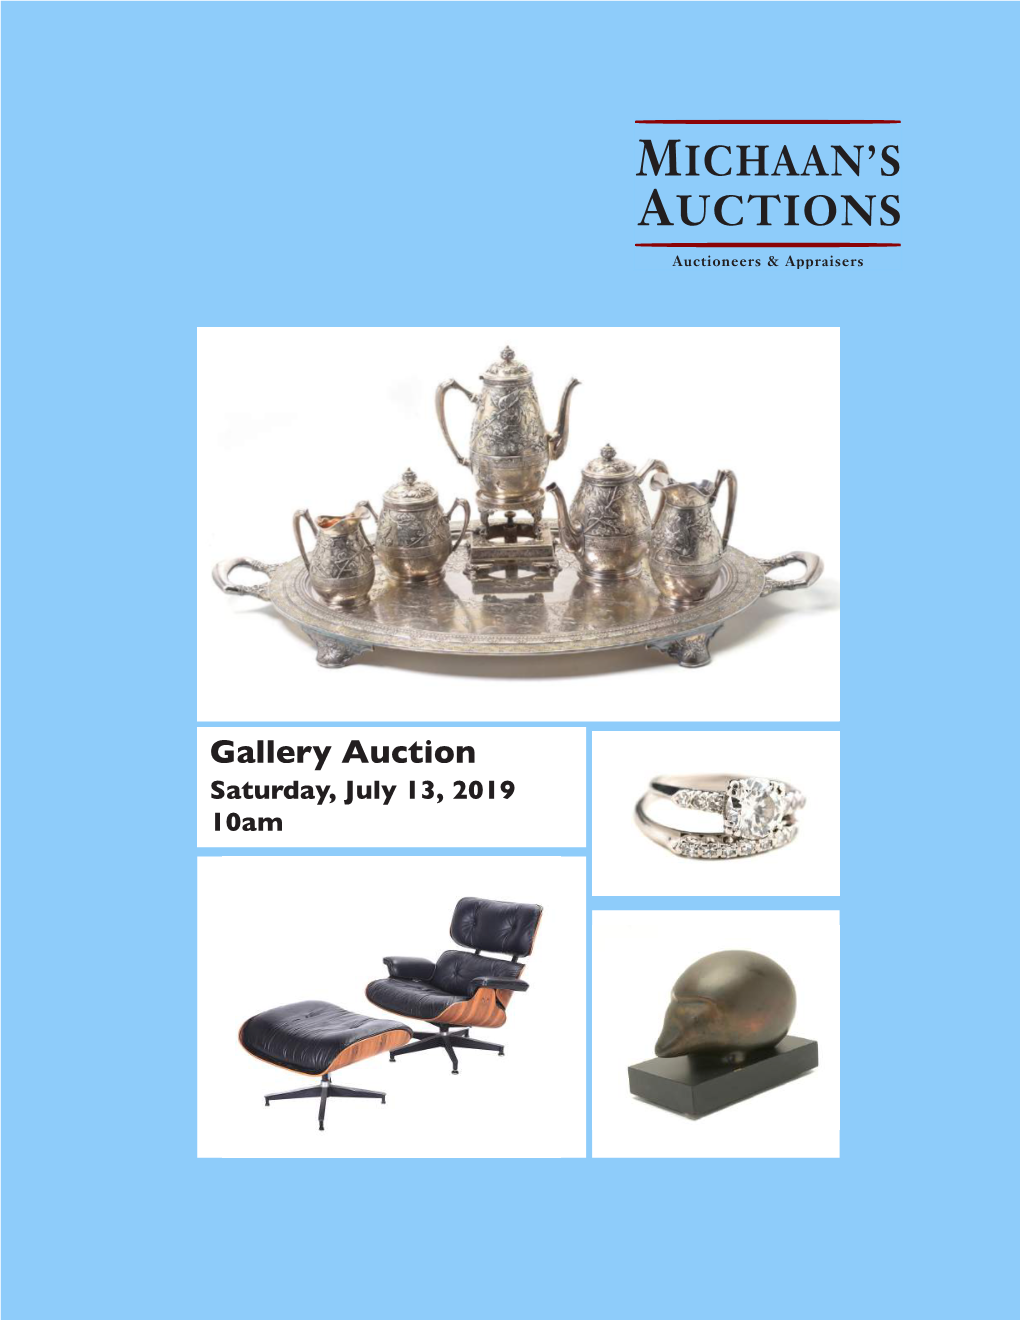 Catalog for July 13, 2019 July Gallery Auction